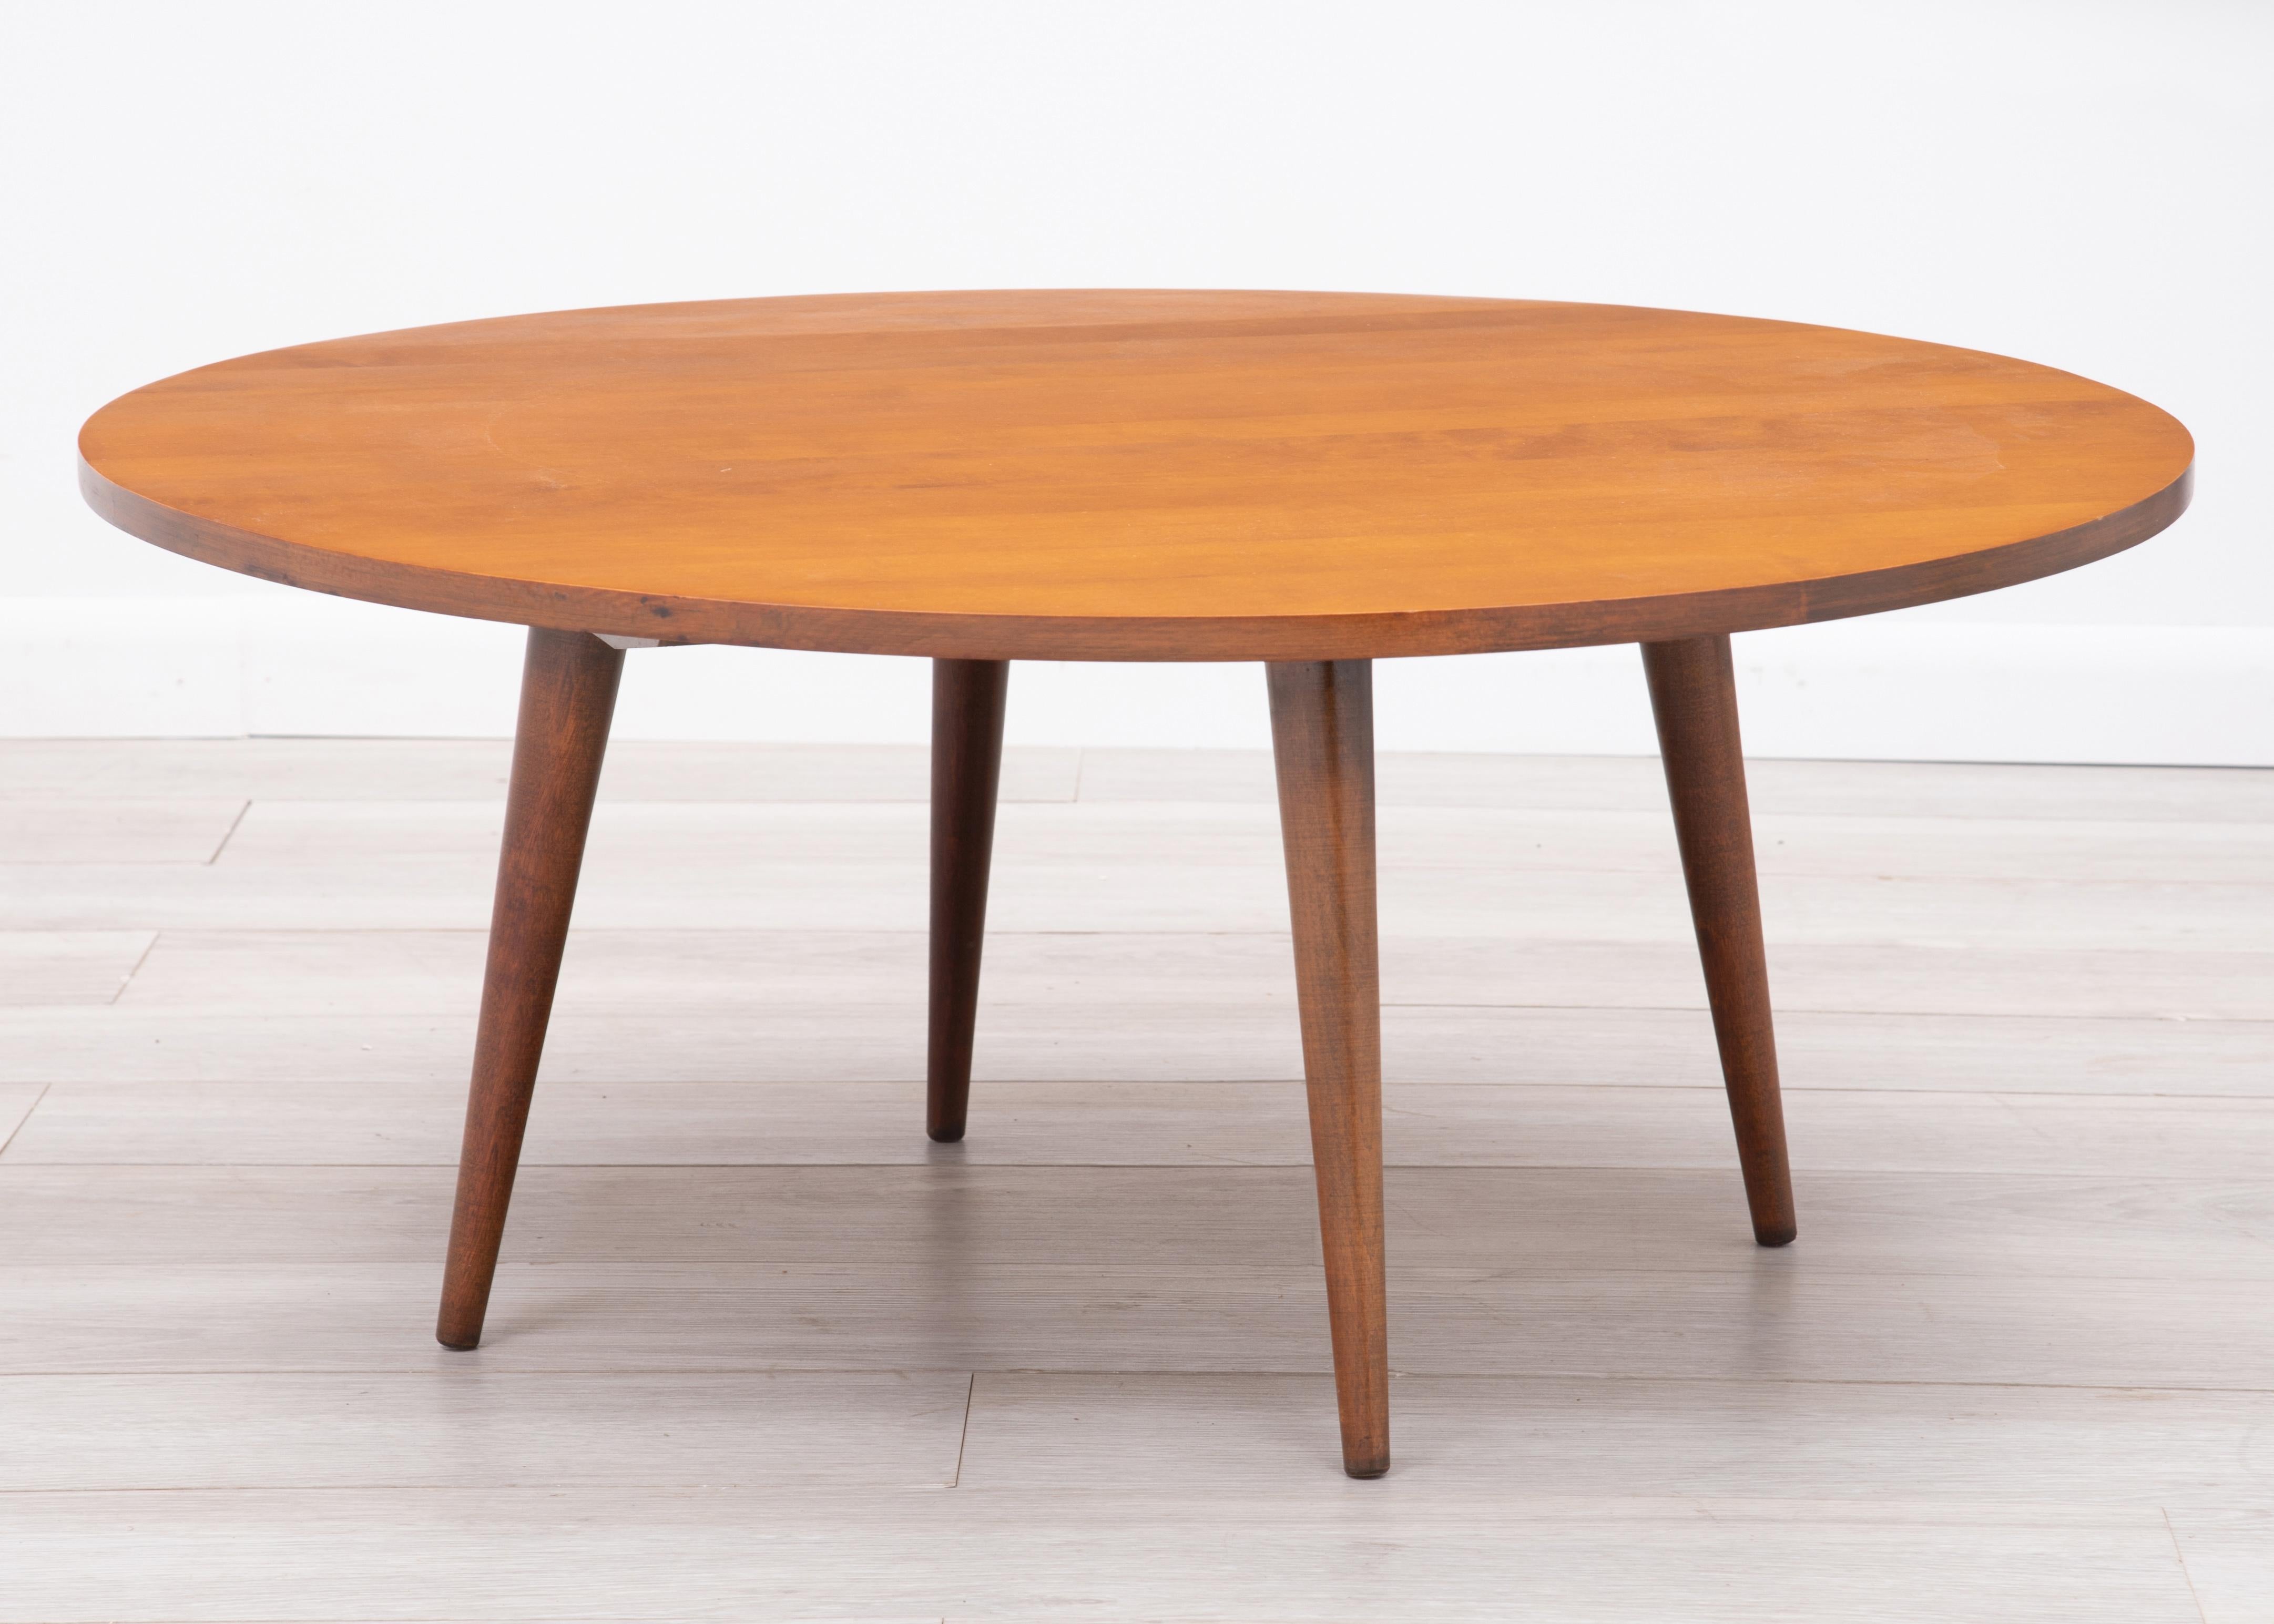 Round Paul McCobb Planner Group Coffee Table Winchendon Unmarked 1950s In Good Condition For Sale In Forest Grove, PA